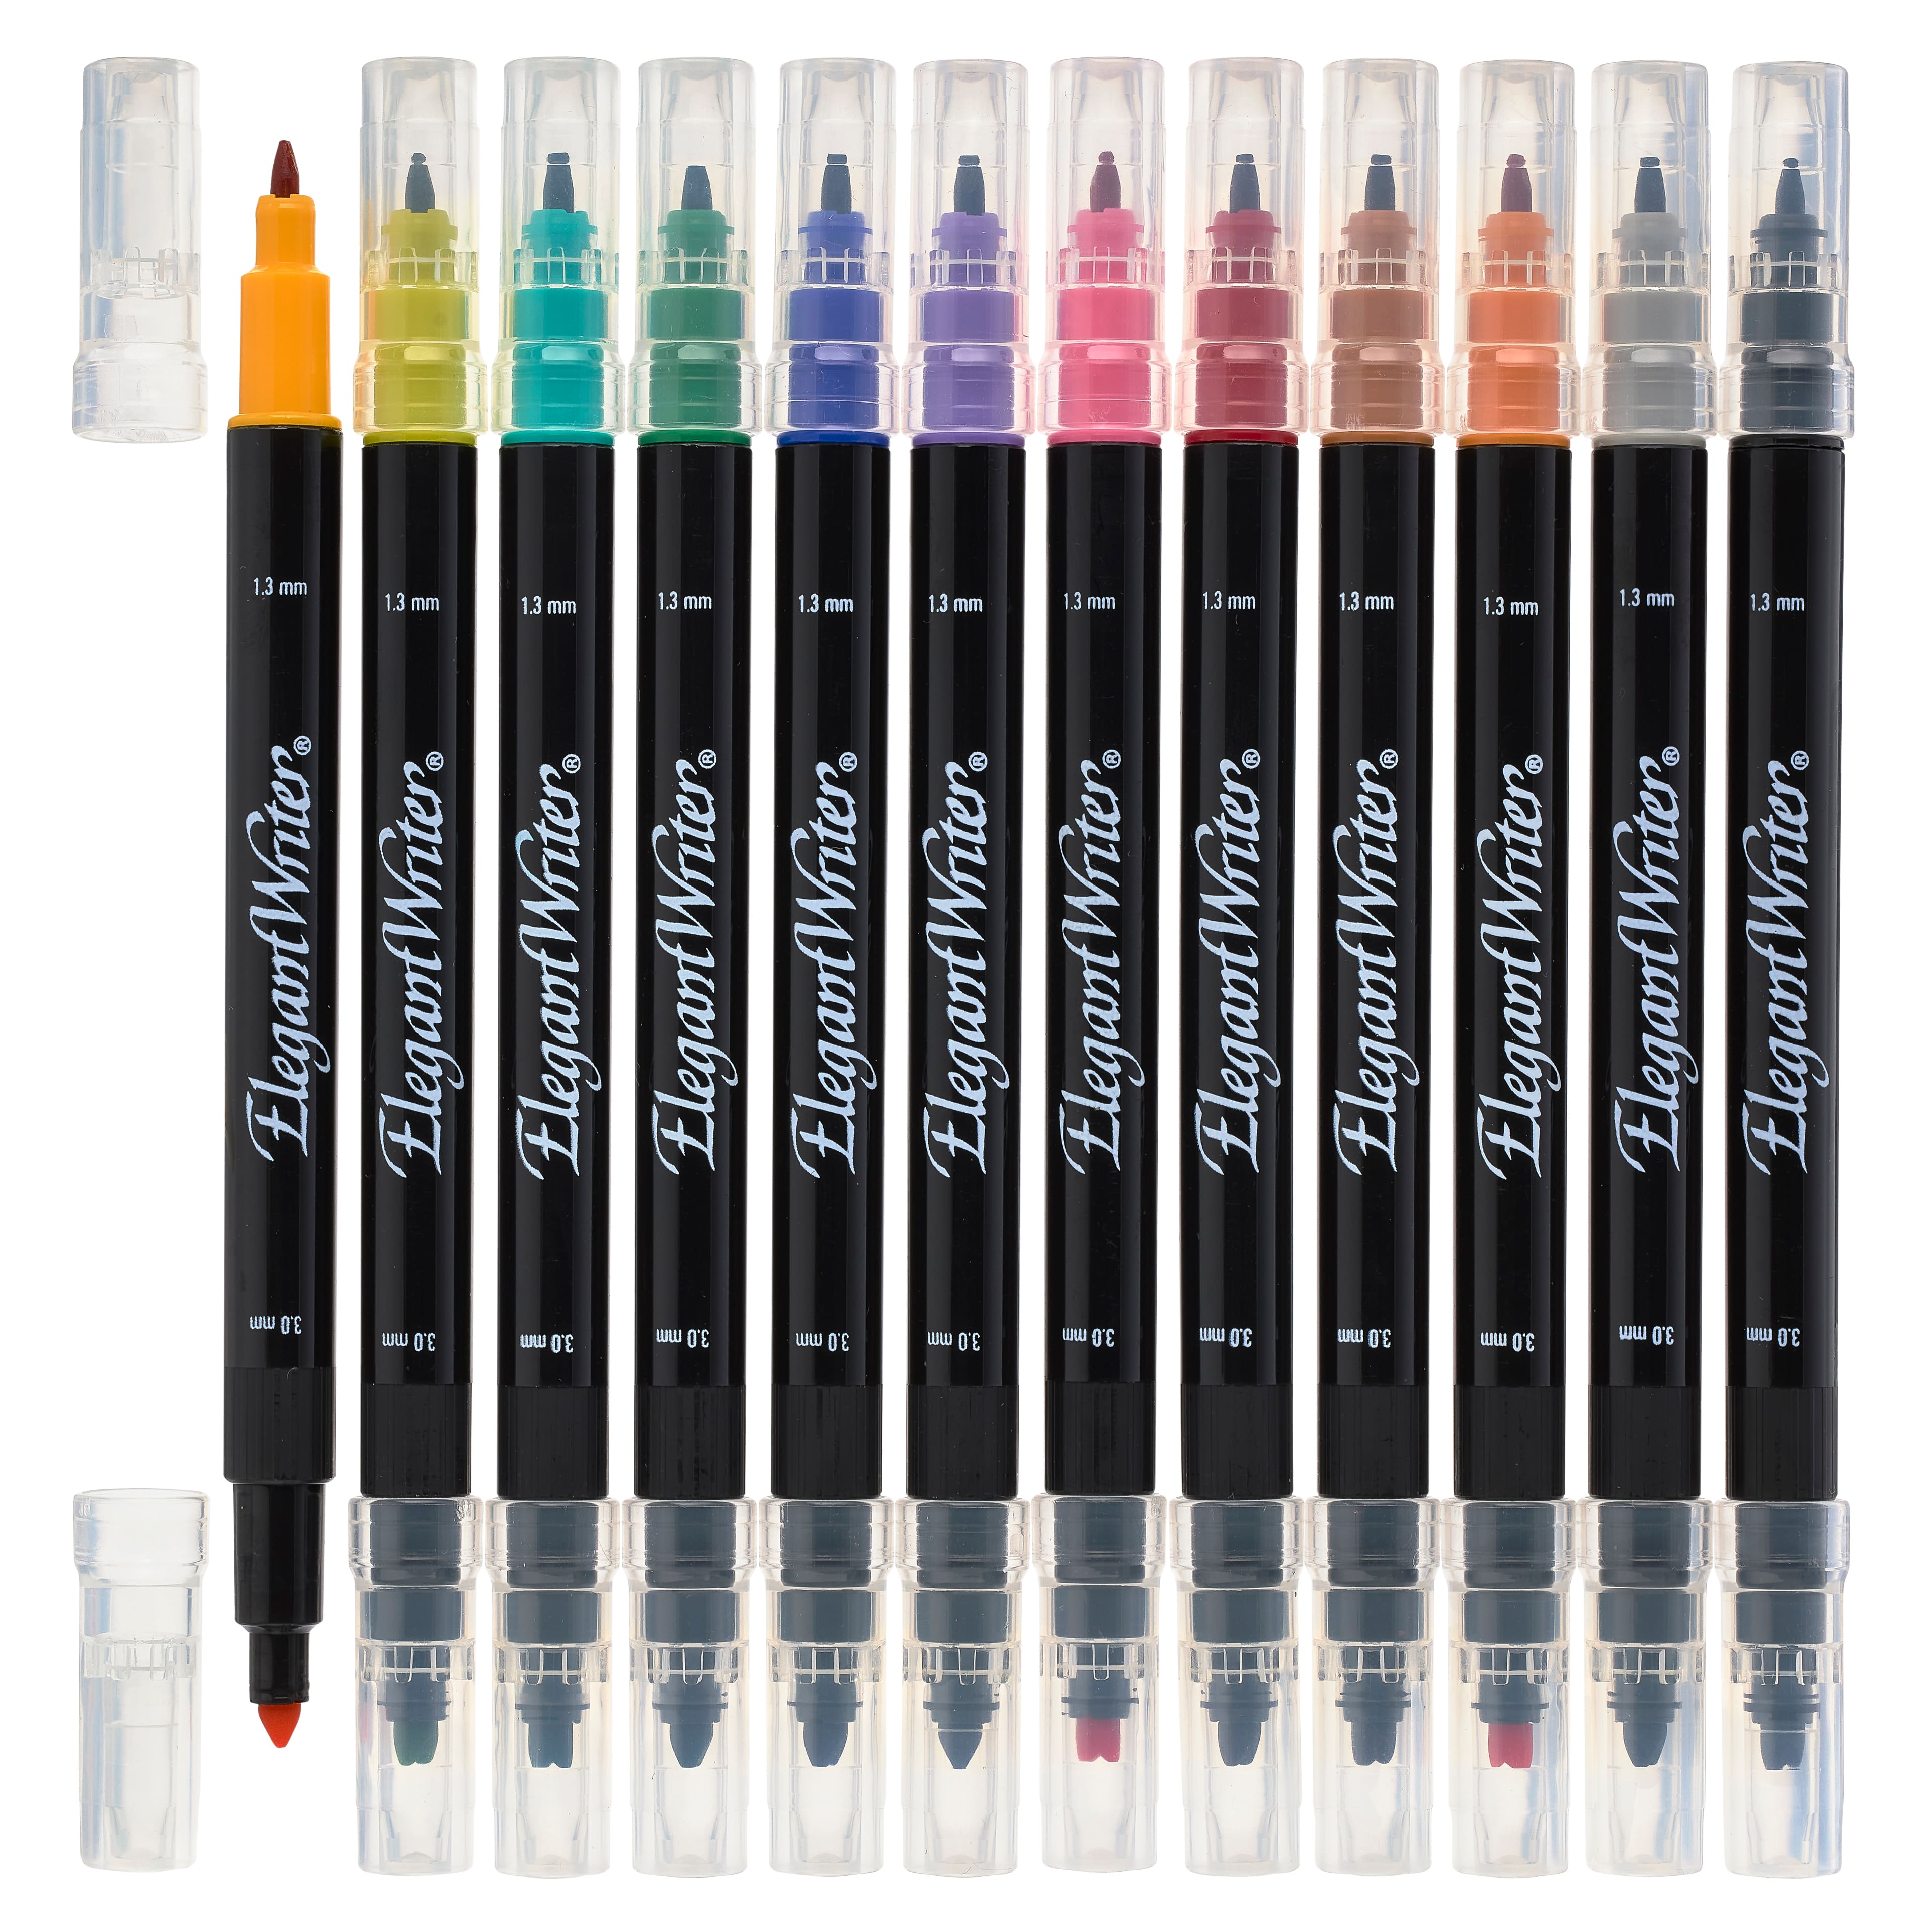 Elegant Writer Dual-Tipped Calligraphy Markers Set of 12